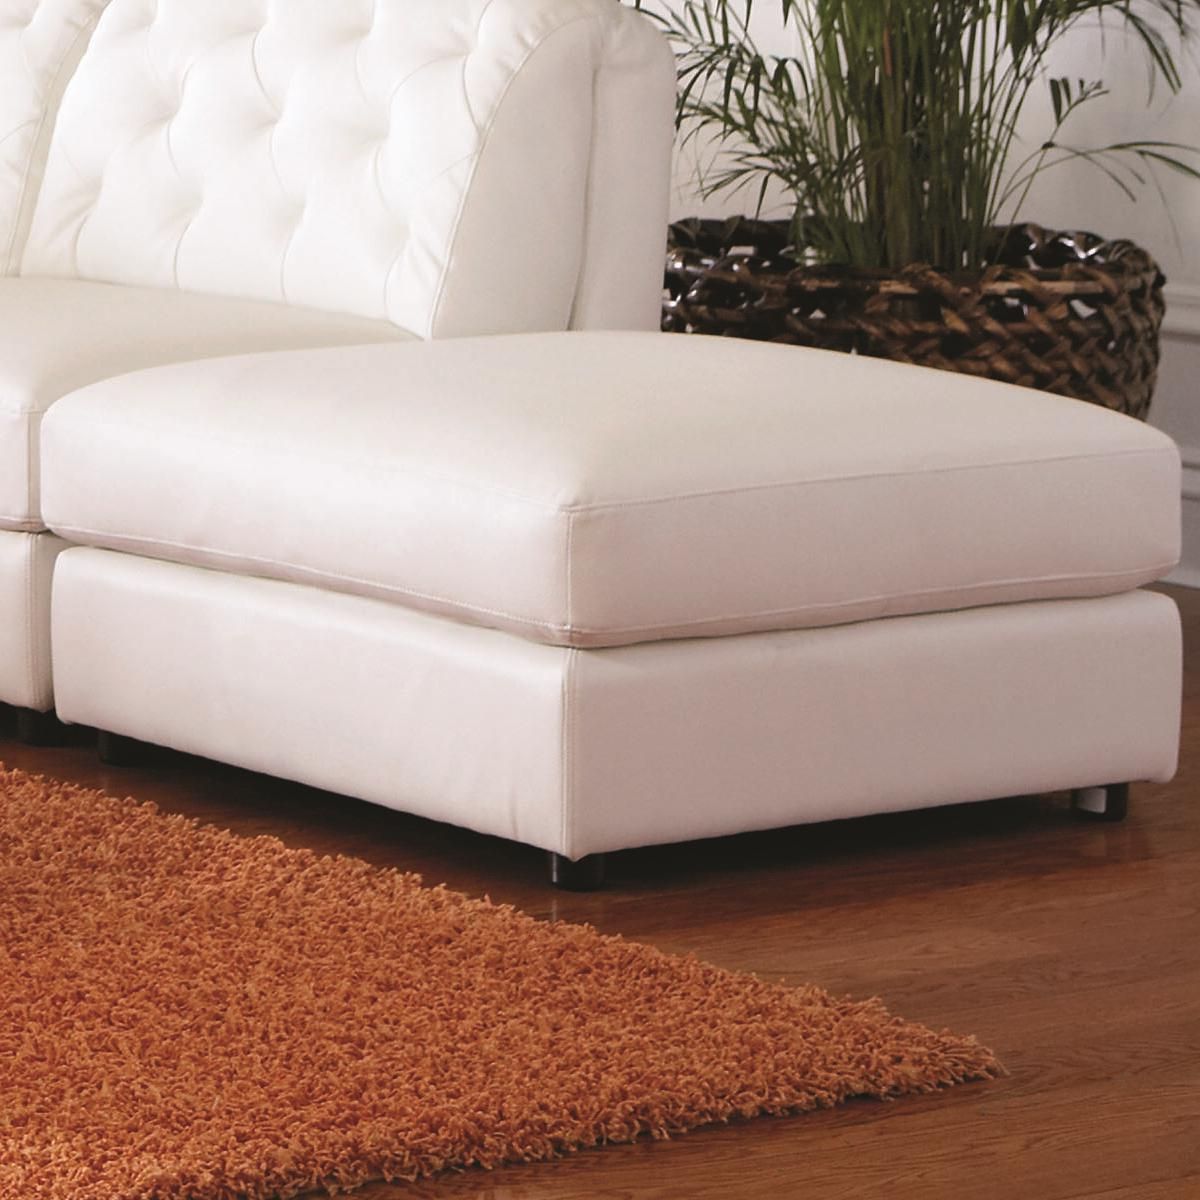 White Leather Ottoman – Steal A Sofa Furniture Outlet Los Angeles Ca Intended For Well Liked White Leather Ottomans (View 2 of 10)